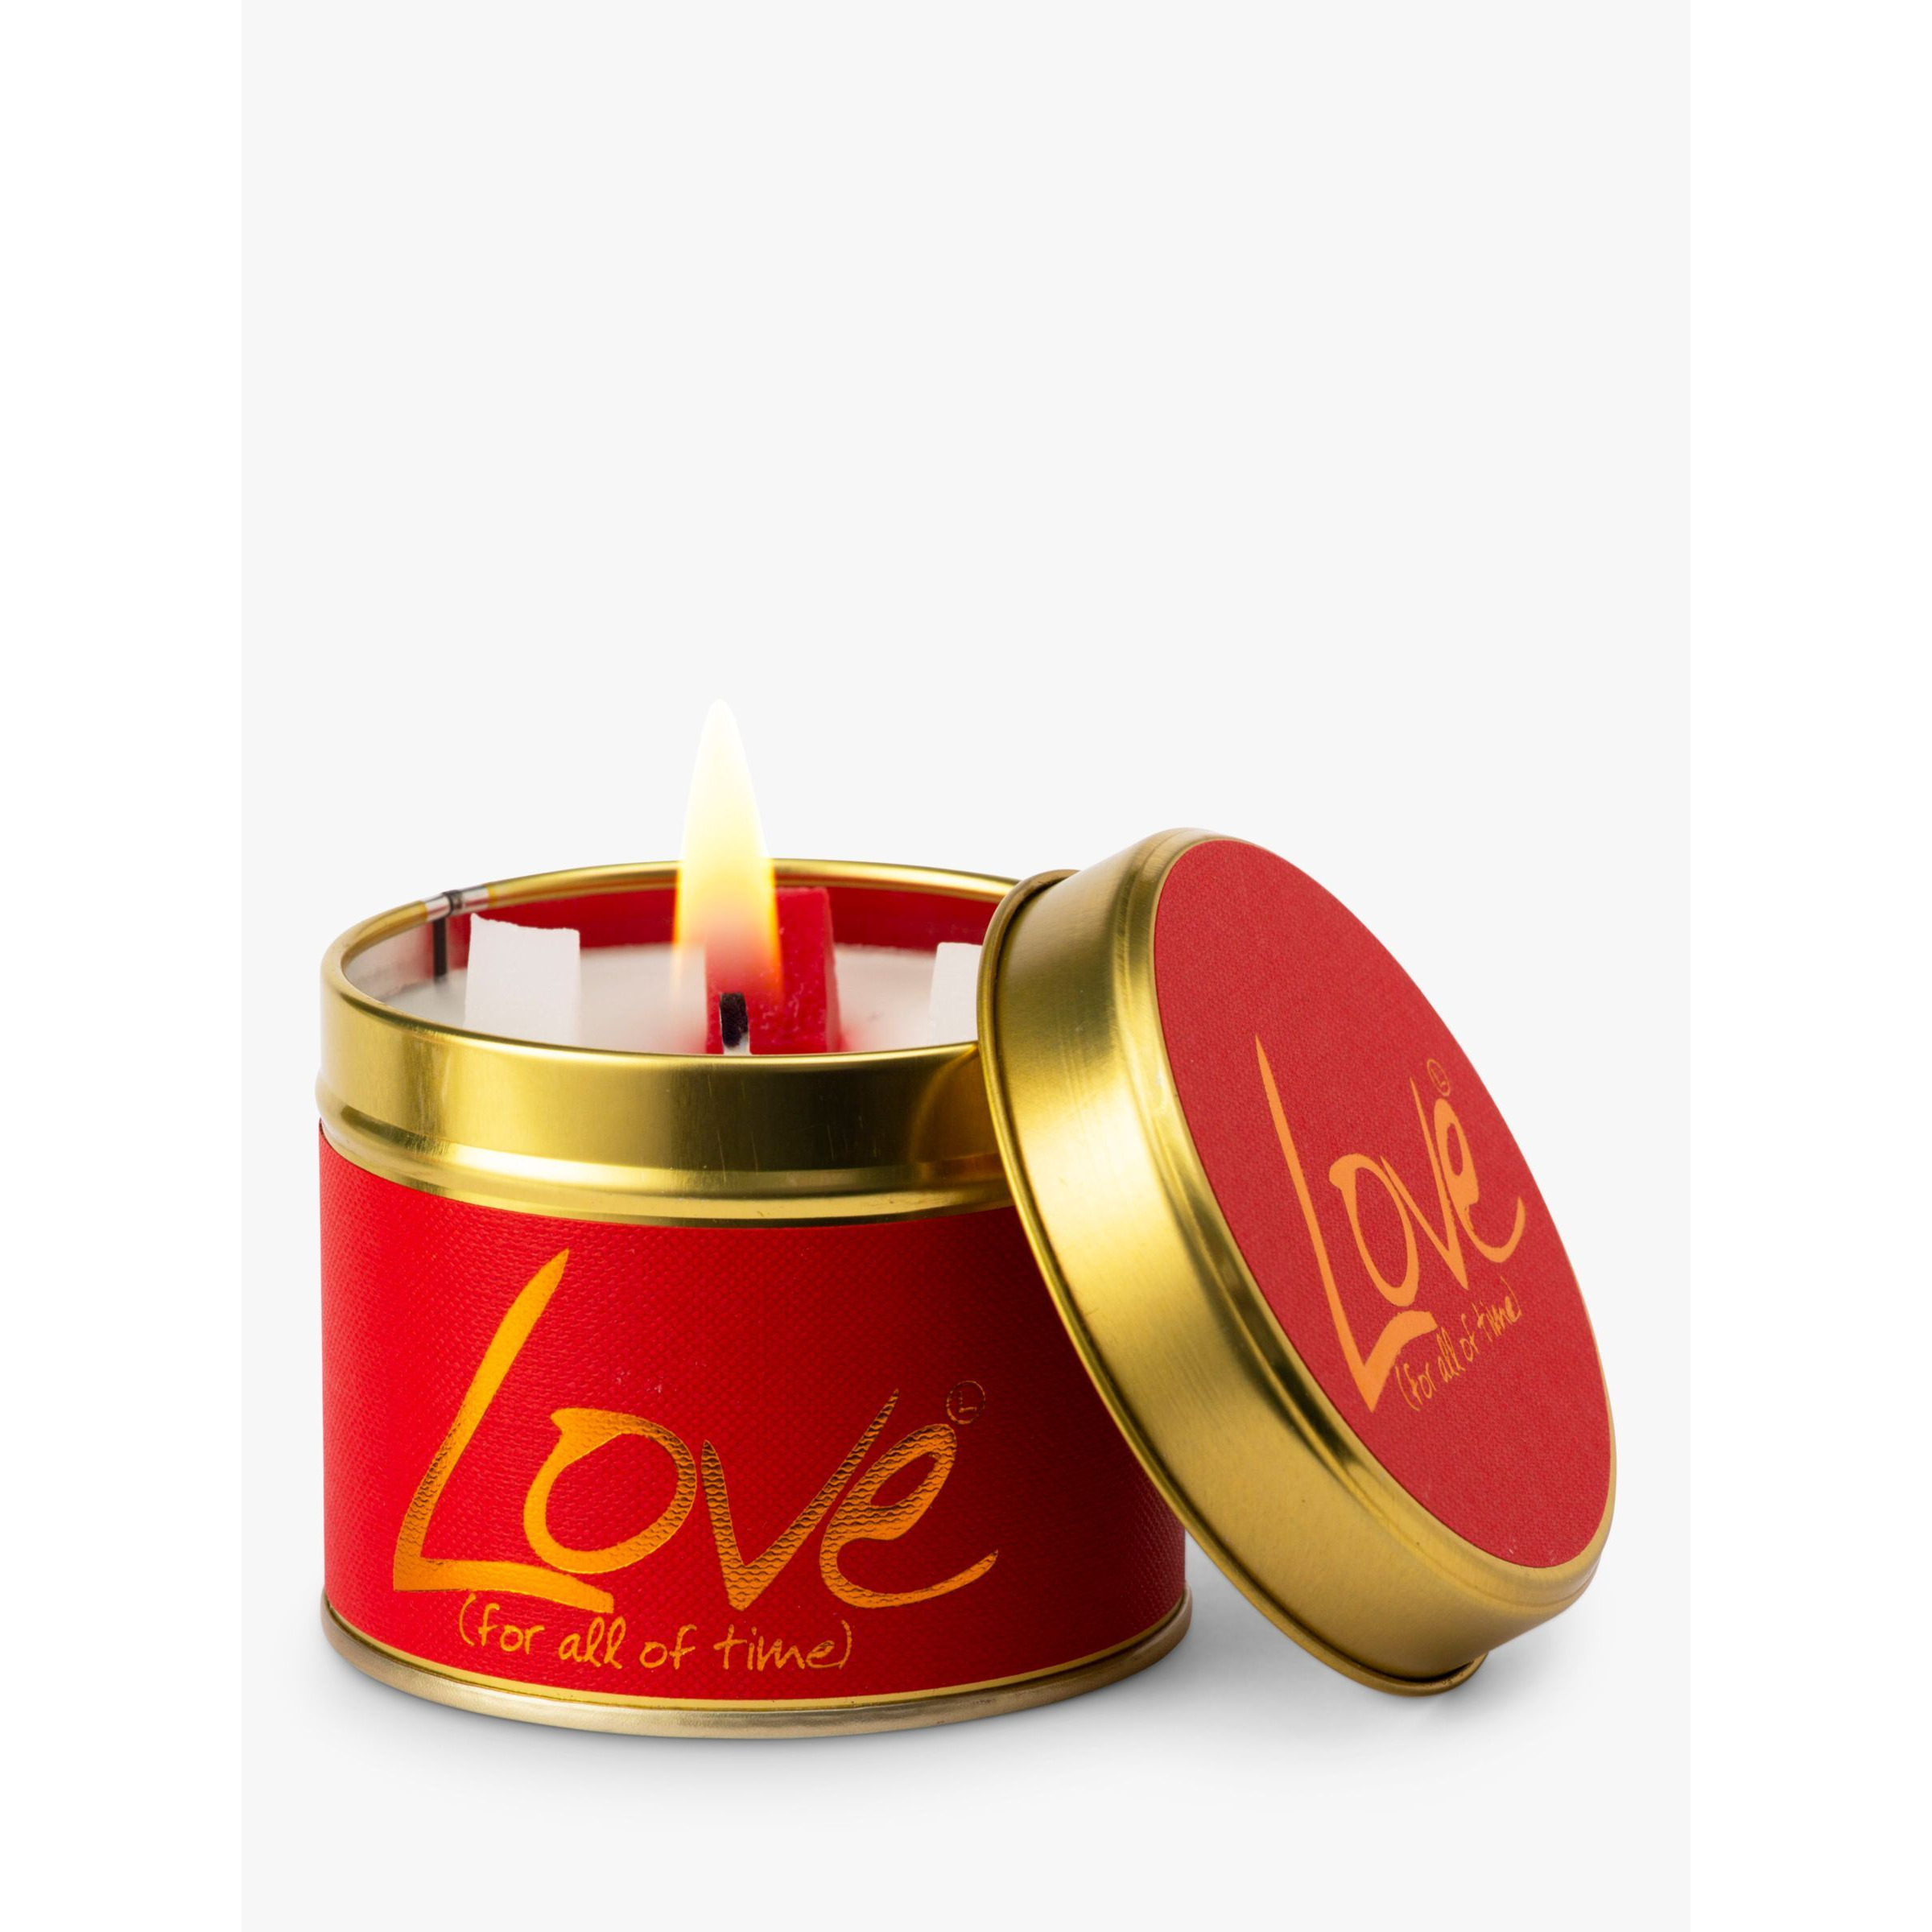 Lily-flame Love Tin Scented Candle, 230g - image 1